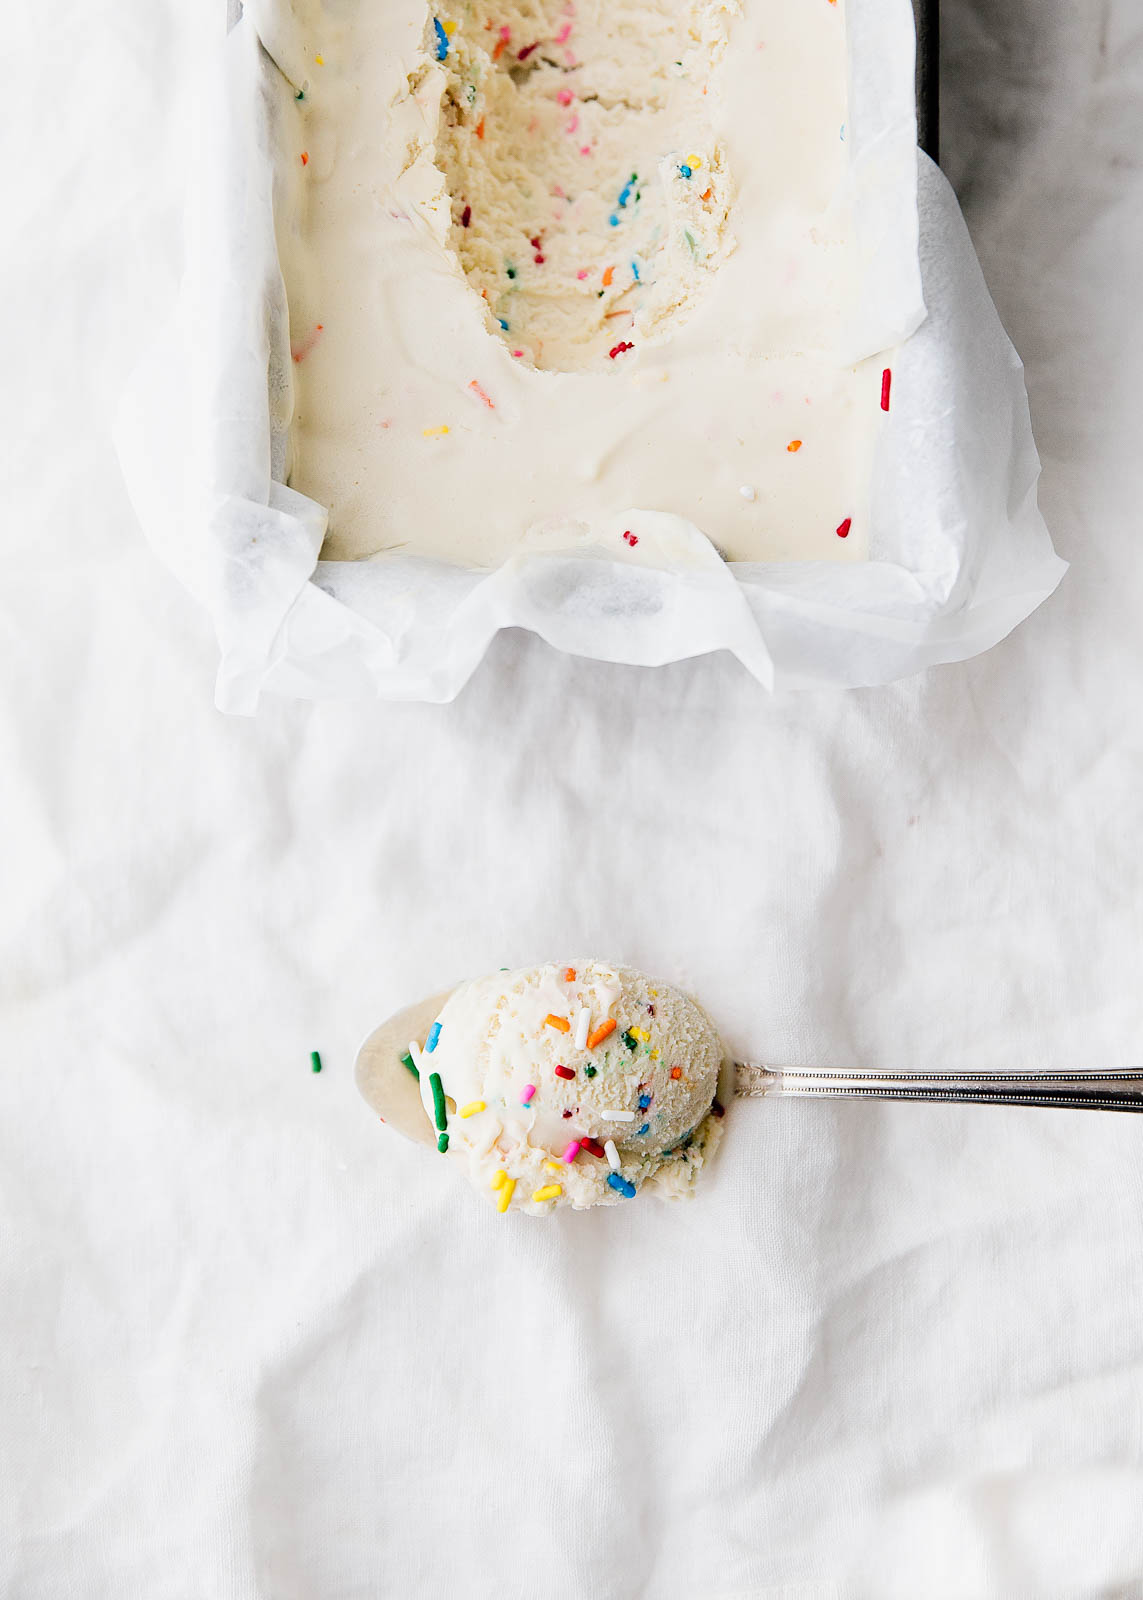 Cake Batter Ice Cream: if ice cream could speak, this one would say "you can have your cake and eat it too."